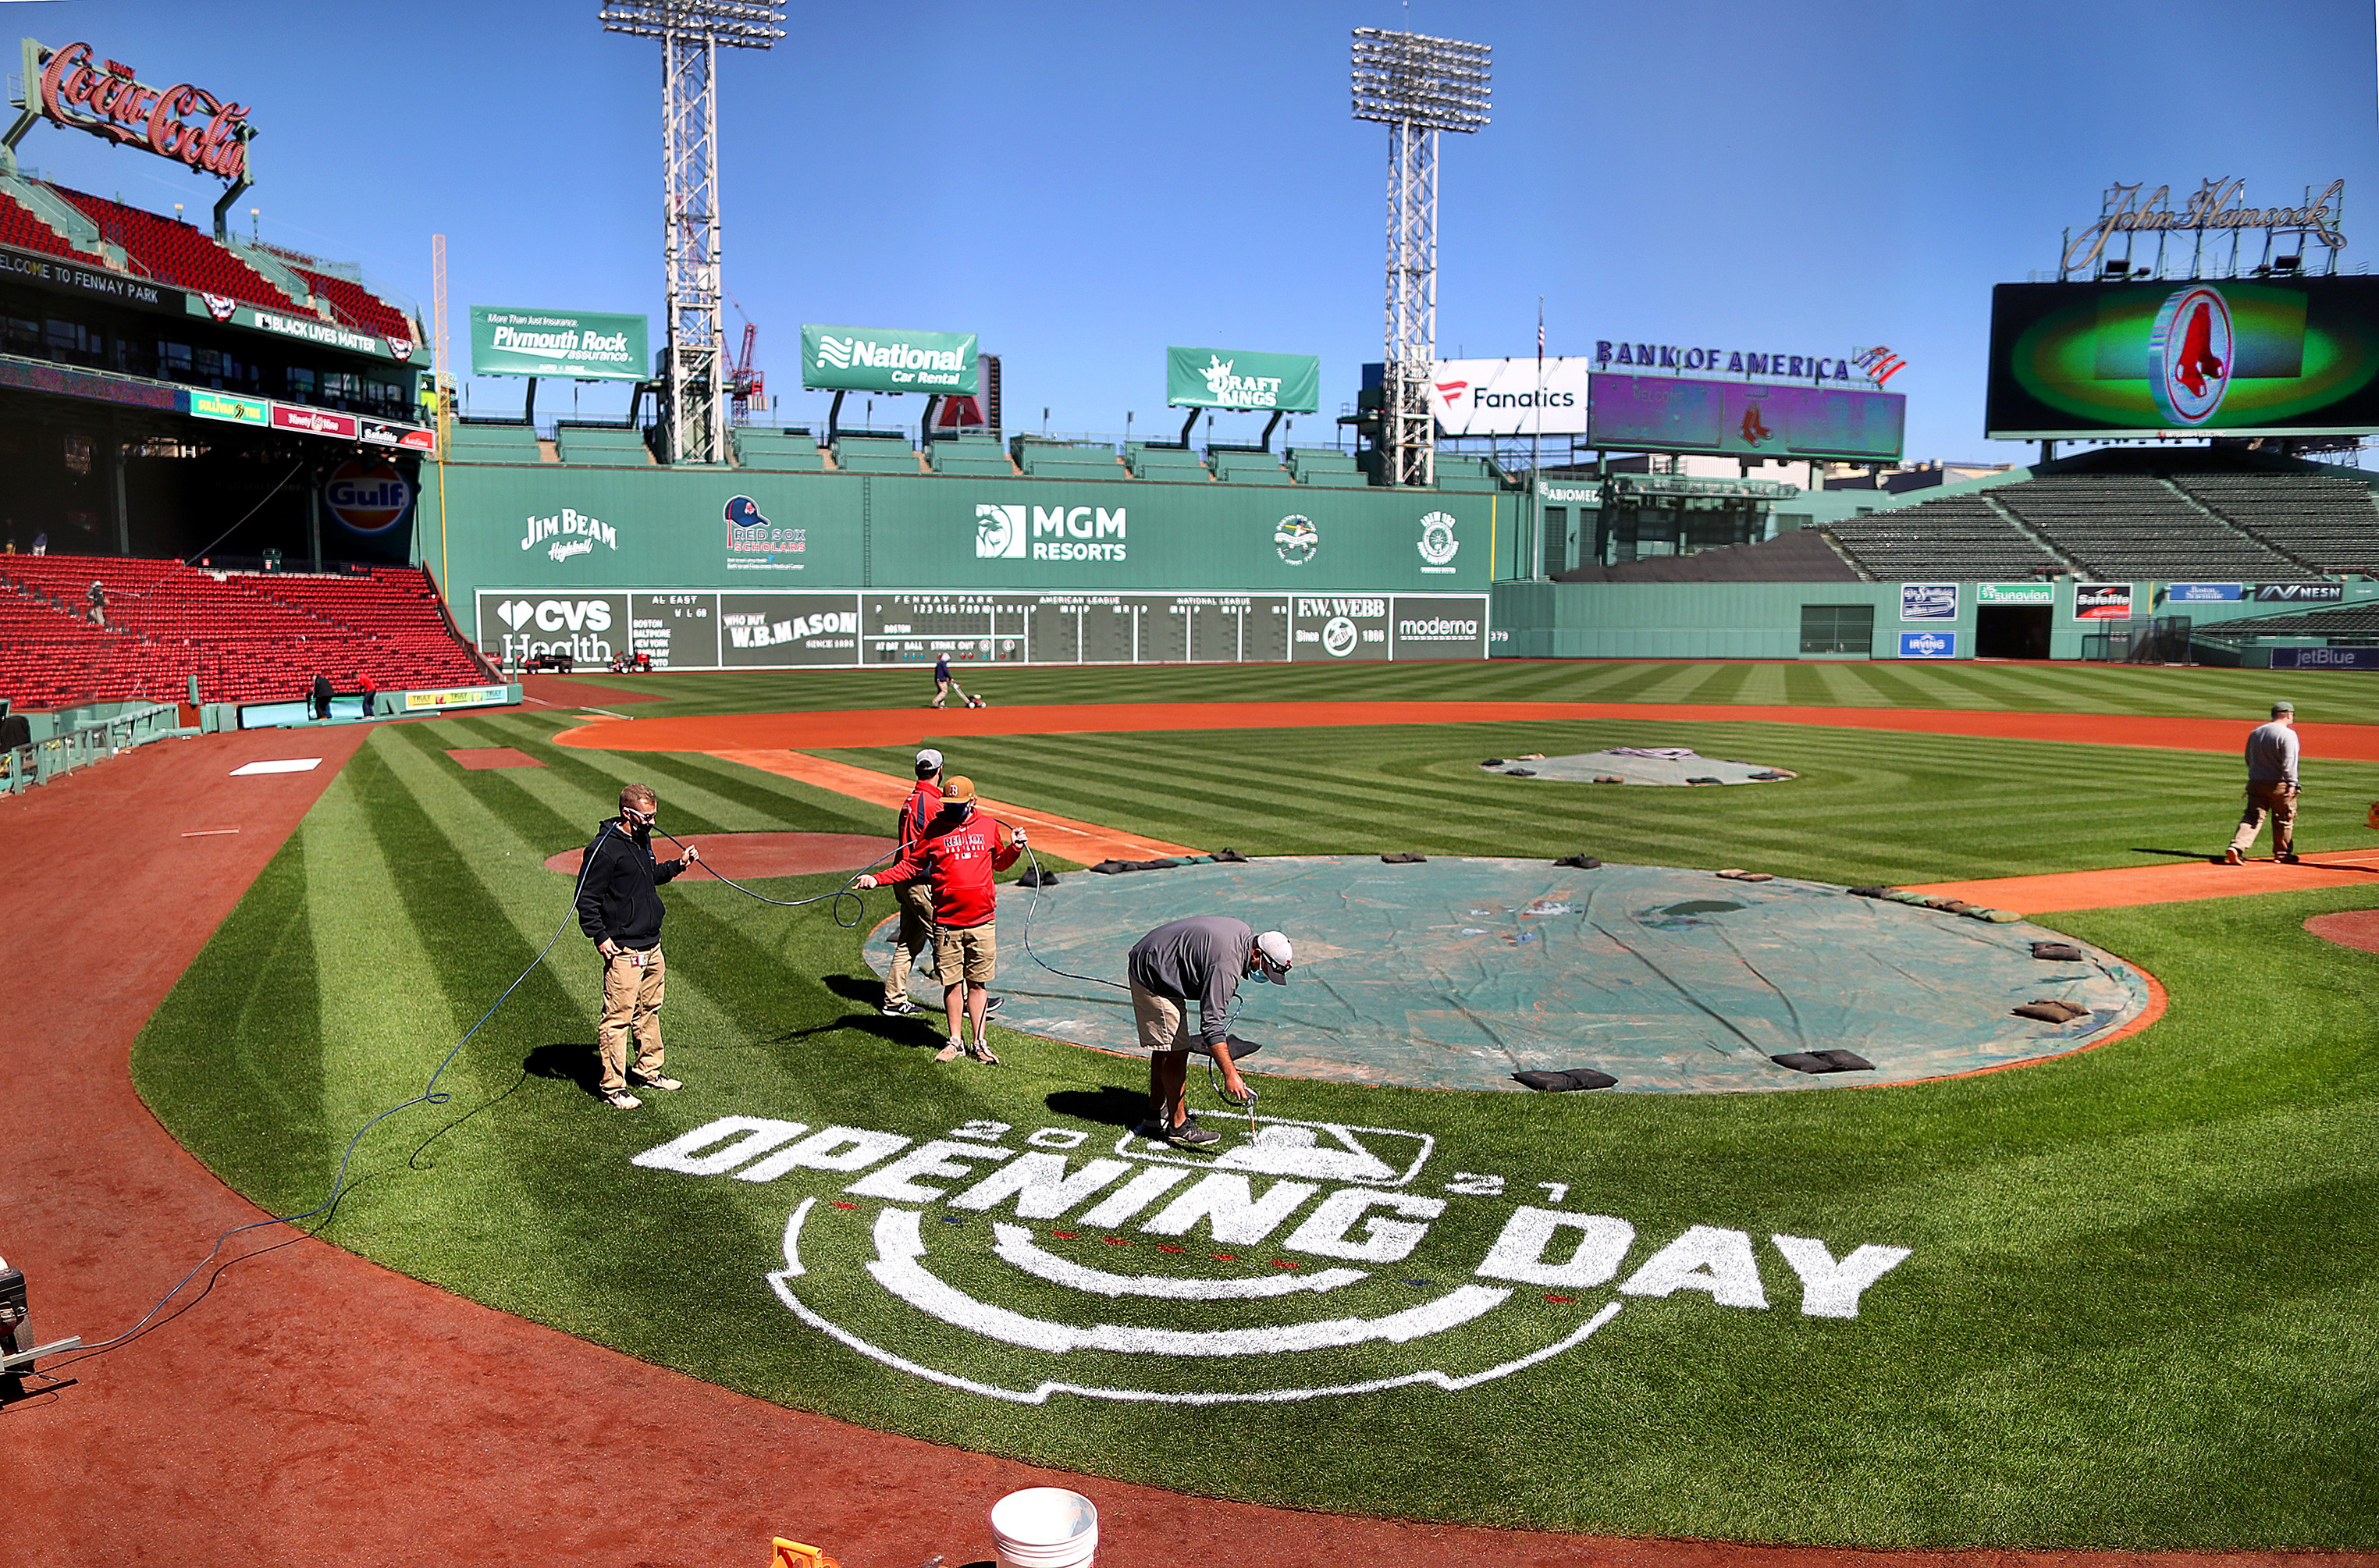 Boston Red Sox - There's nothing like Patriots' Day at Fenway!